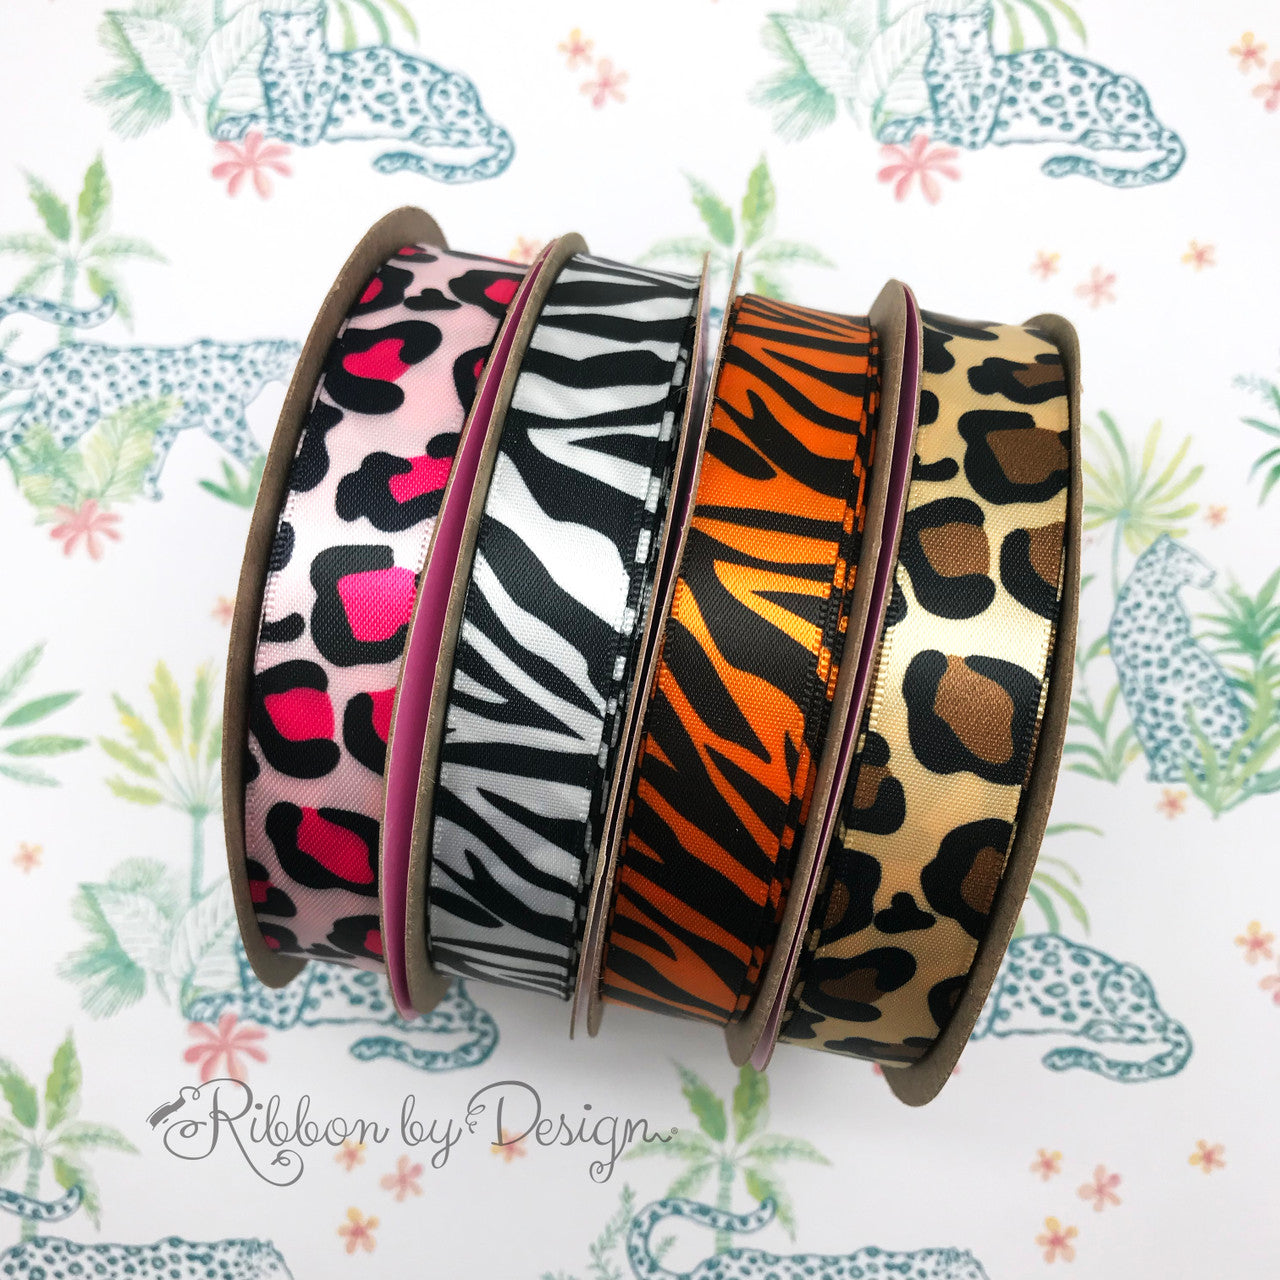 Mix and match our animal print ribbons to round out your jungle themed party ribbons!